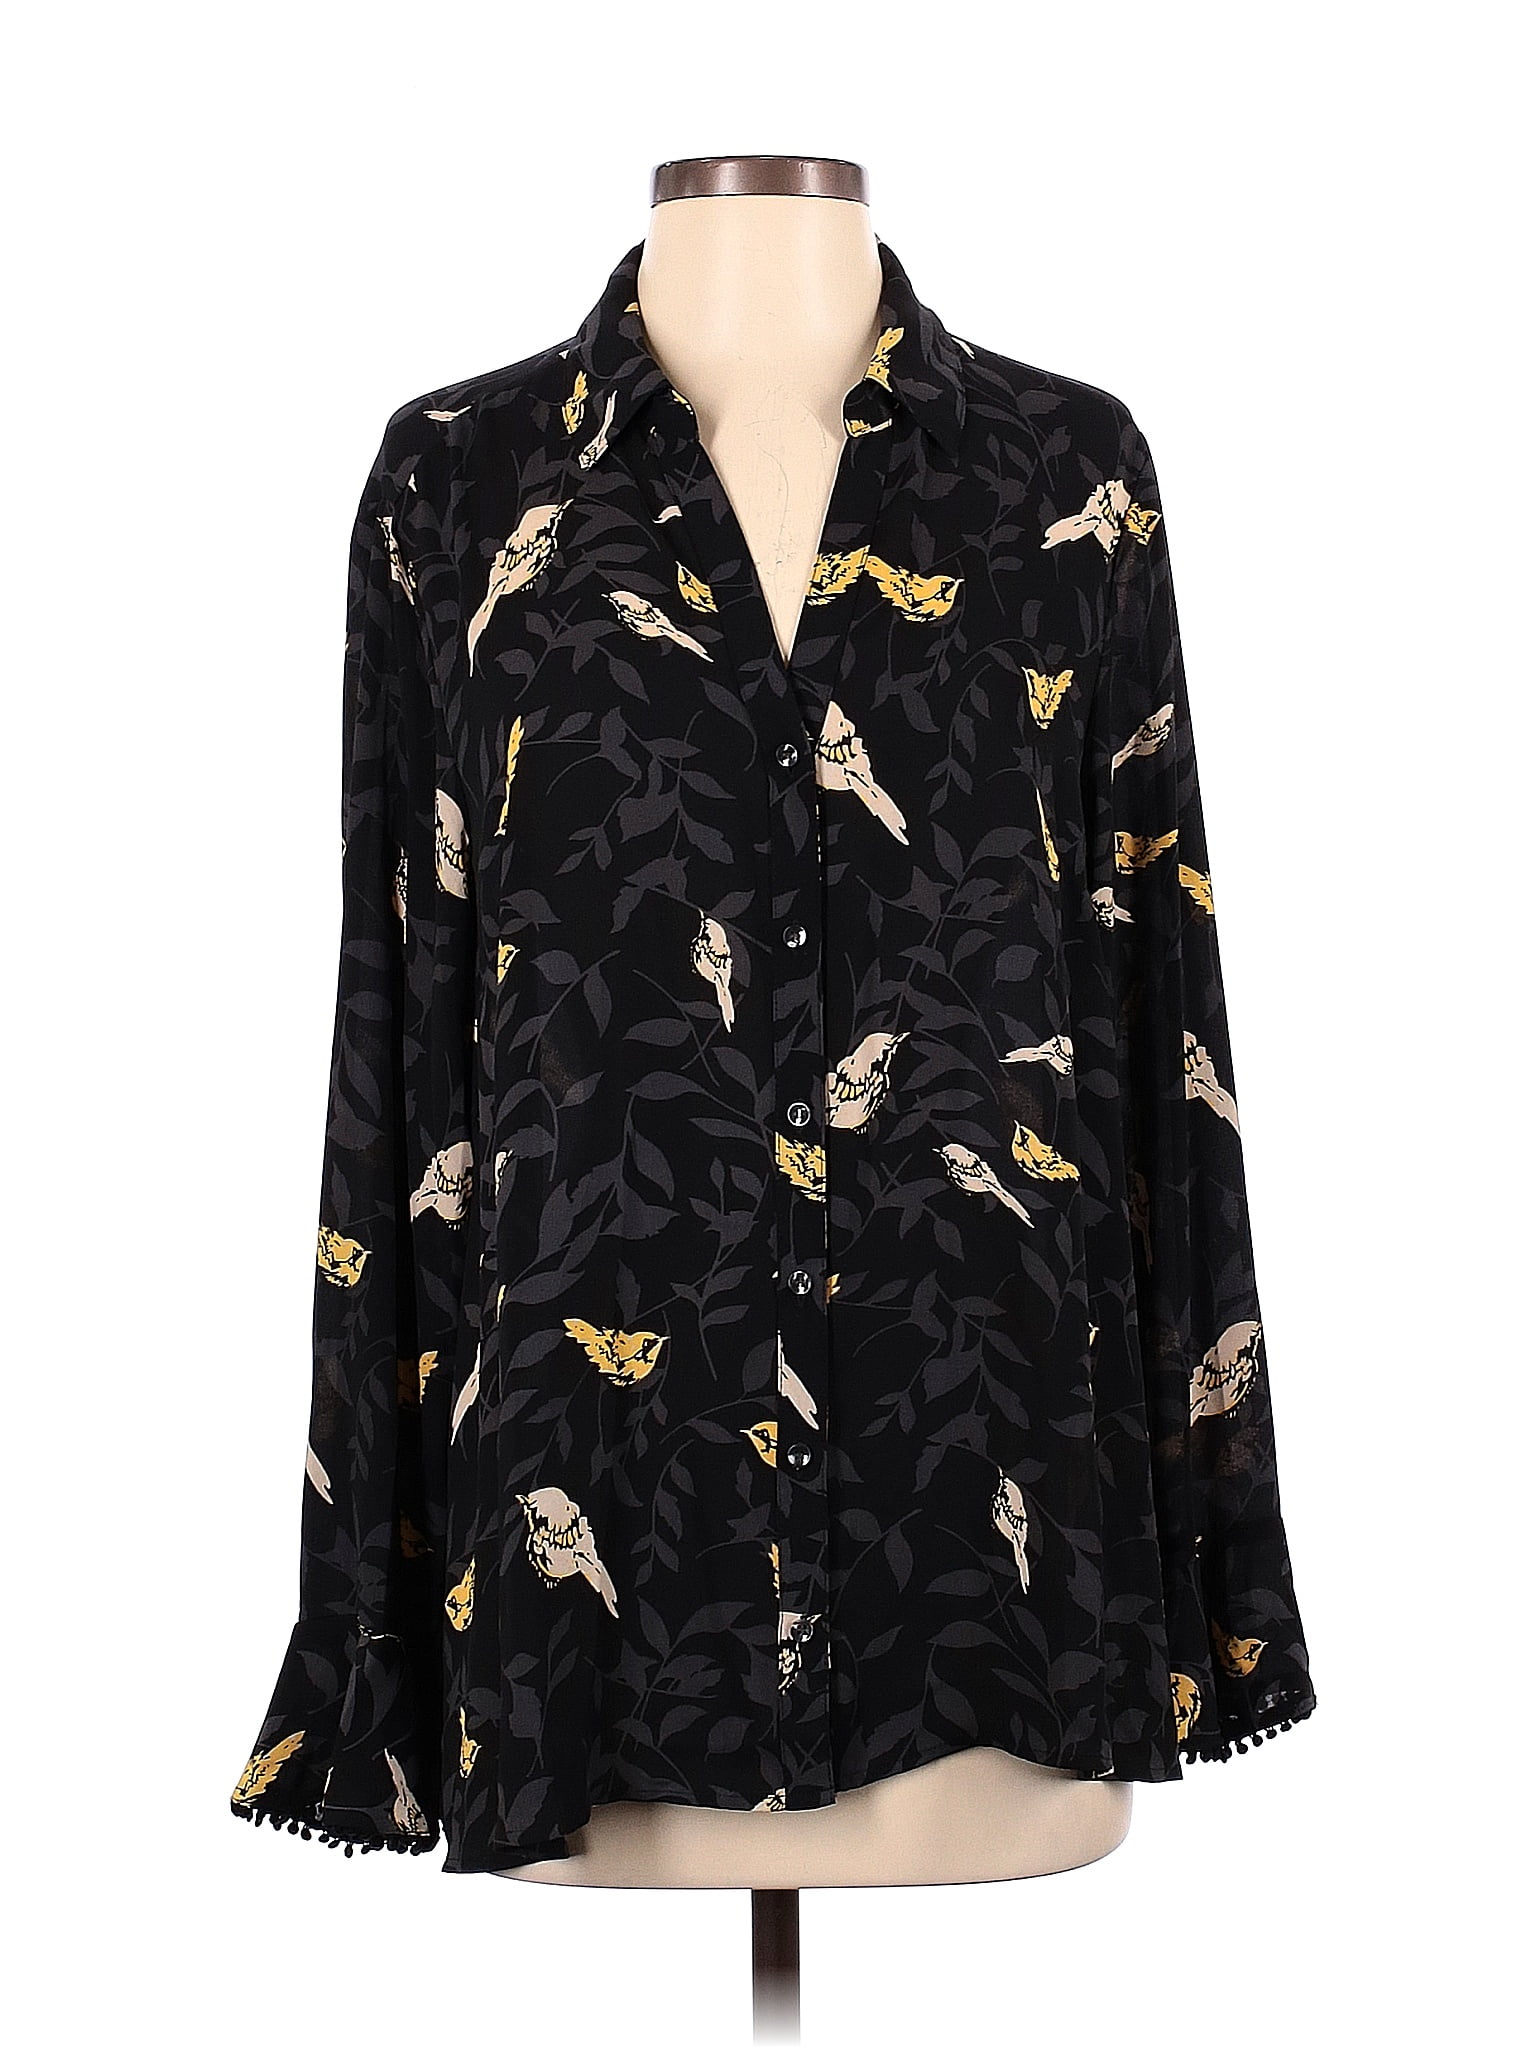 Charter Club 100% Polyester Black Long Sleeve Blouse Size M - 76% off ...